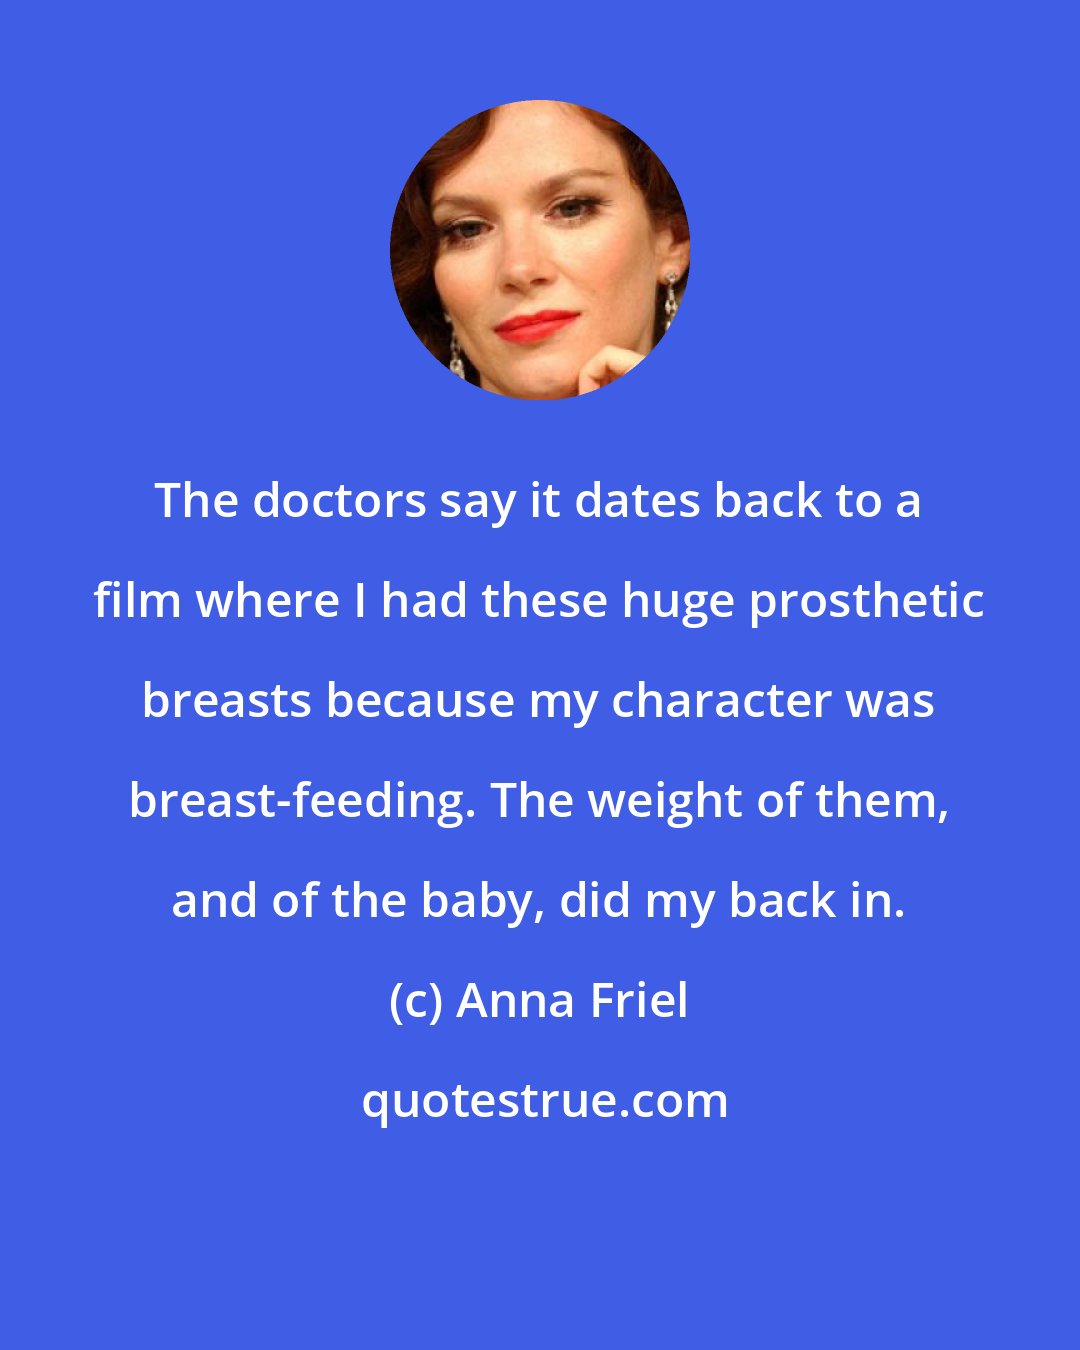 Anna Friel: The doctors say it dates back to a film where I had these huge prosthetic breasts because my character was breast-feeding. The weight of them, and of the baby, did my back in.